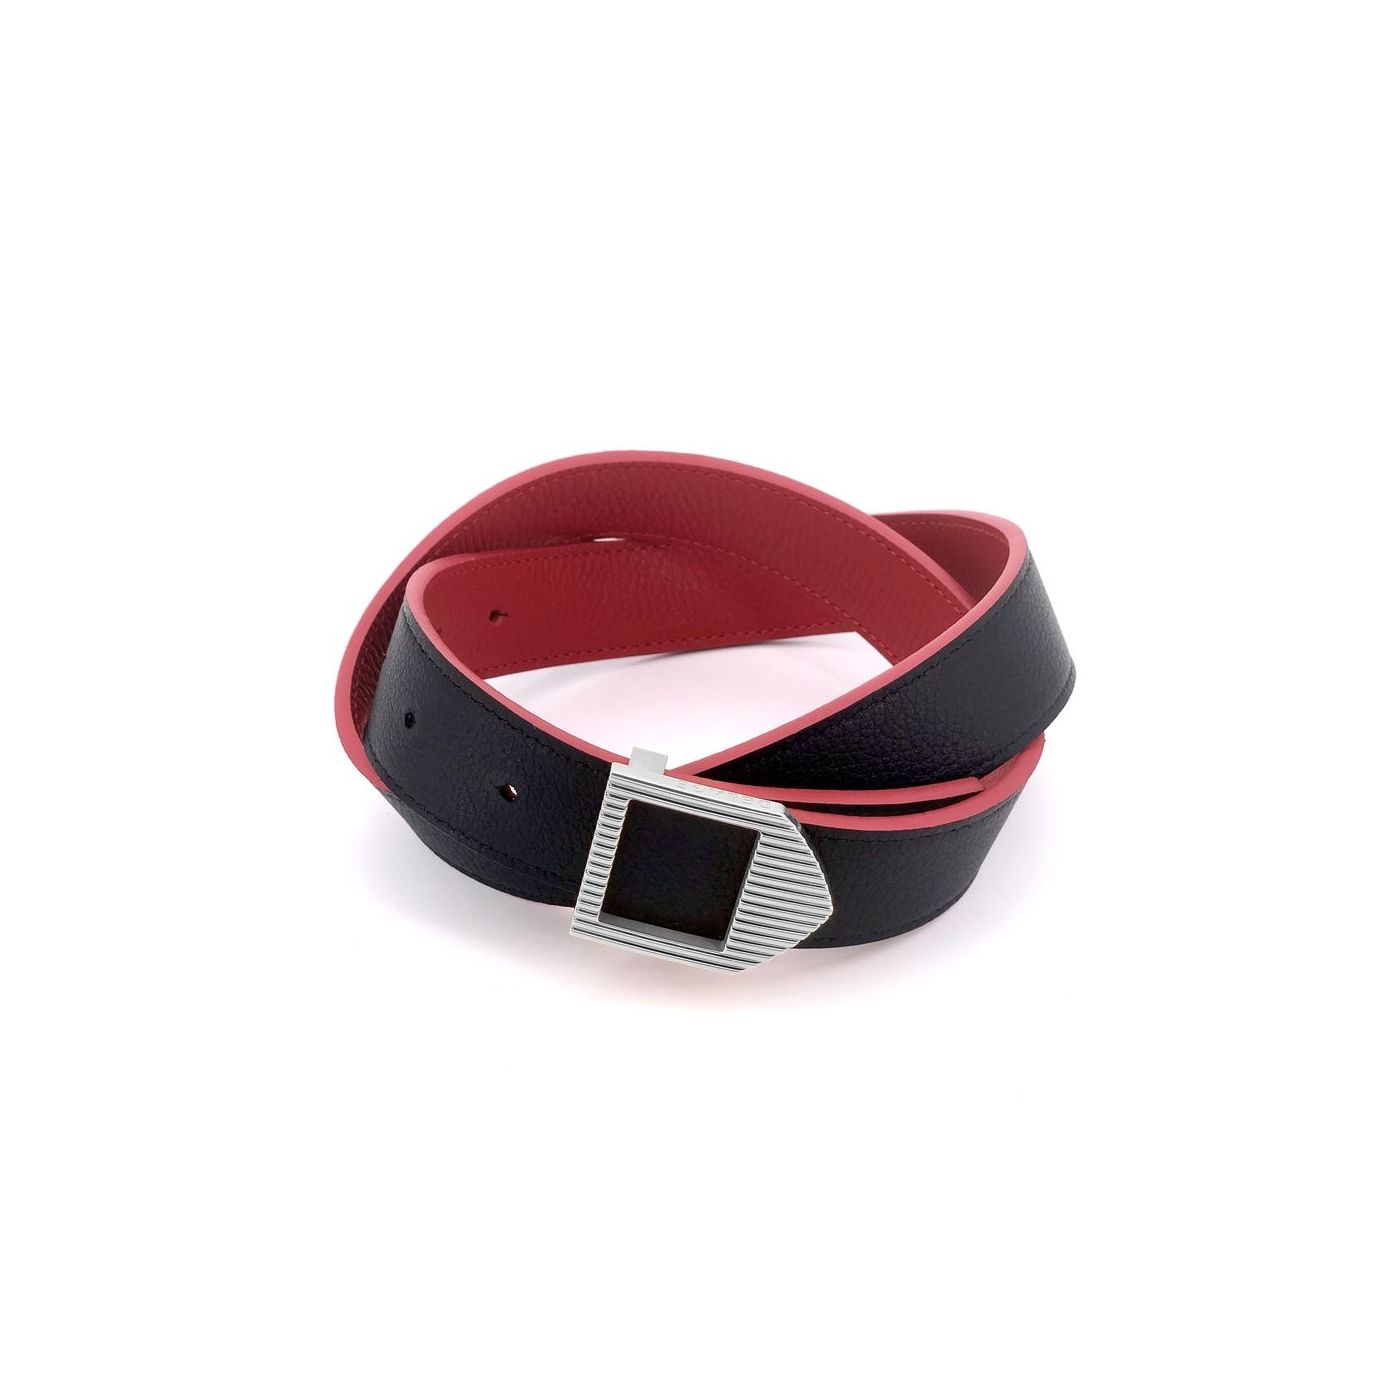 Reversible leather belt red & black / silver buckle